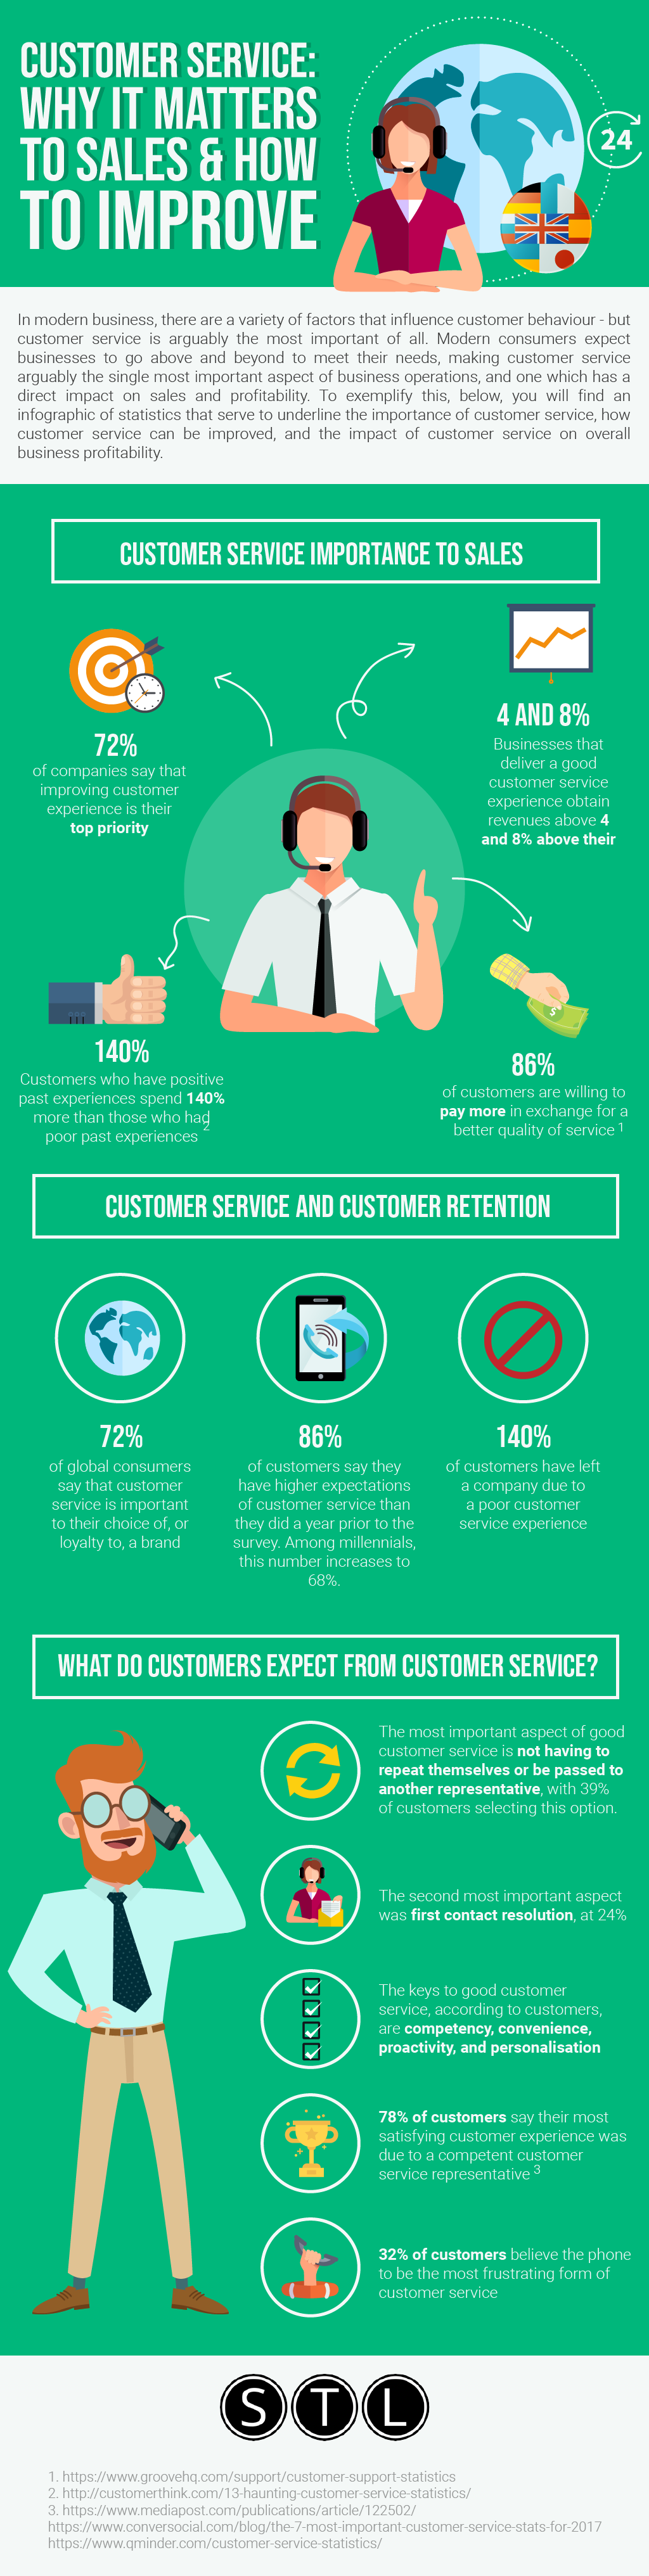 Customer Service - Why it Matters to Sales and How to Improve